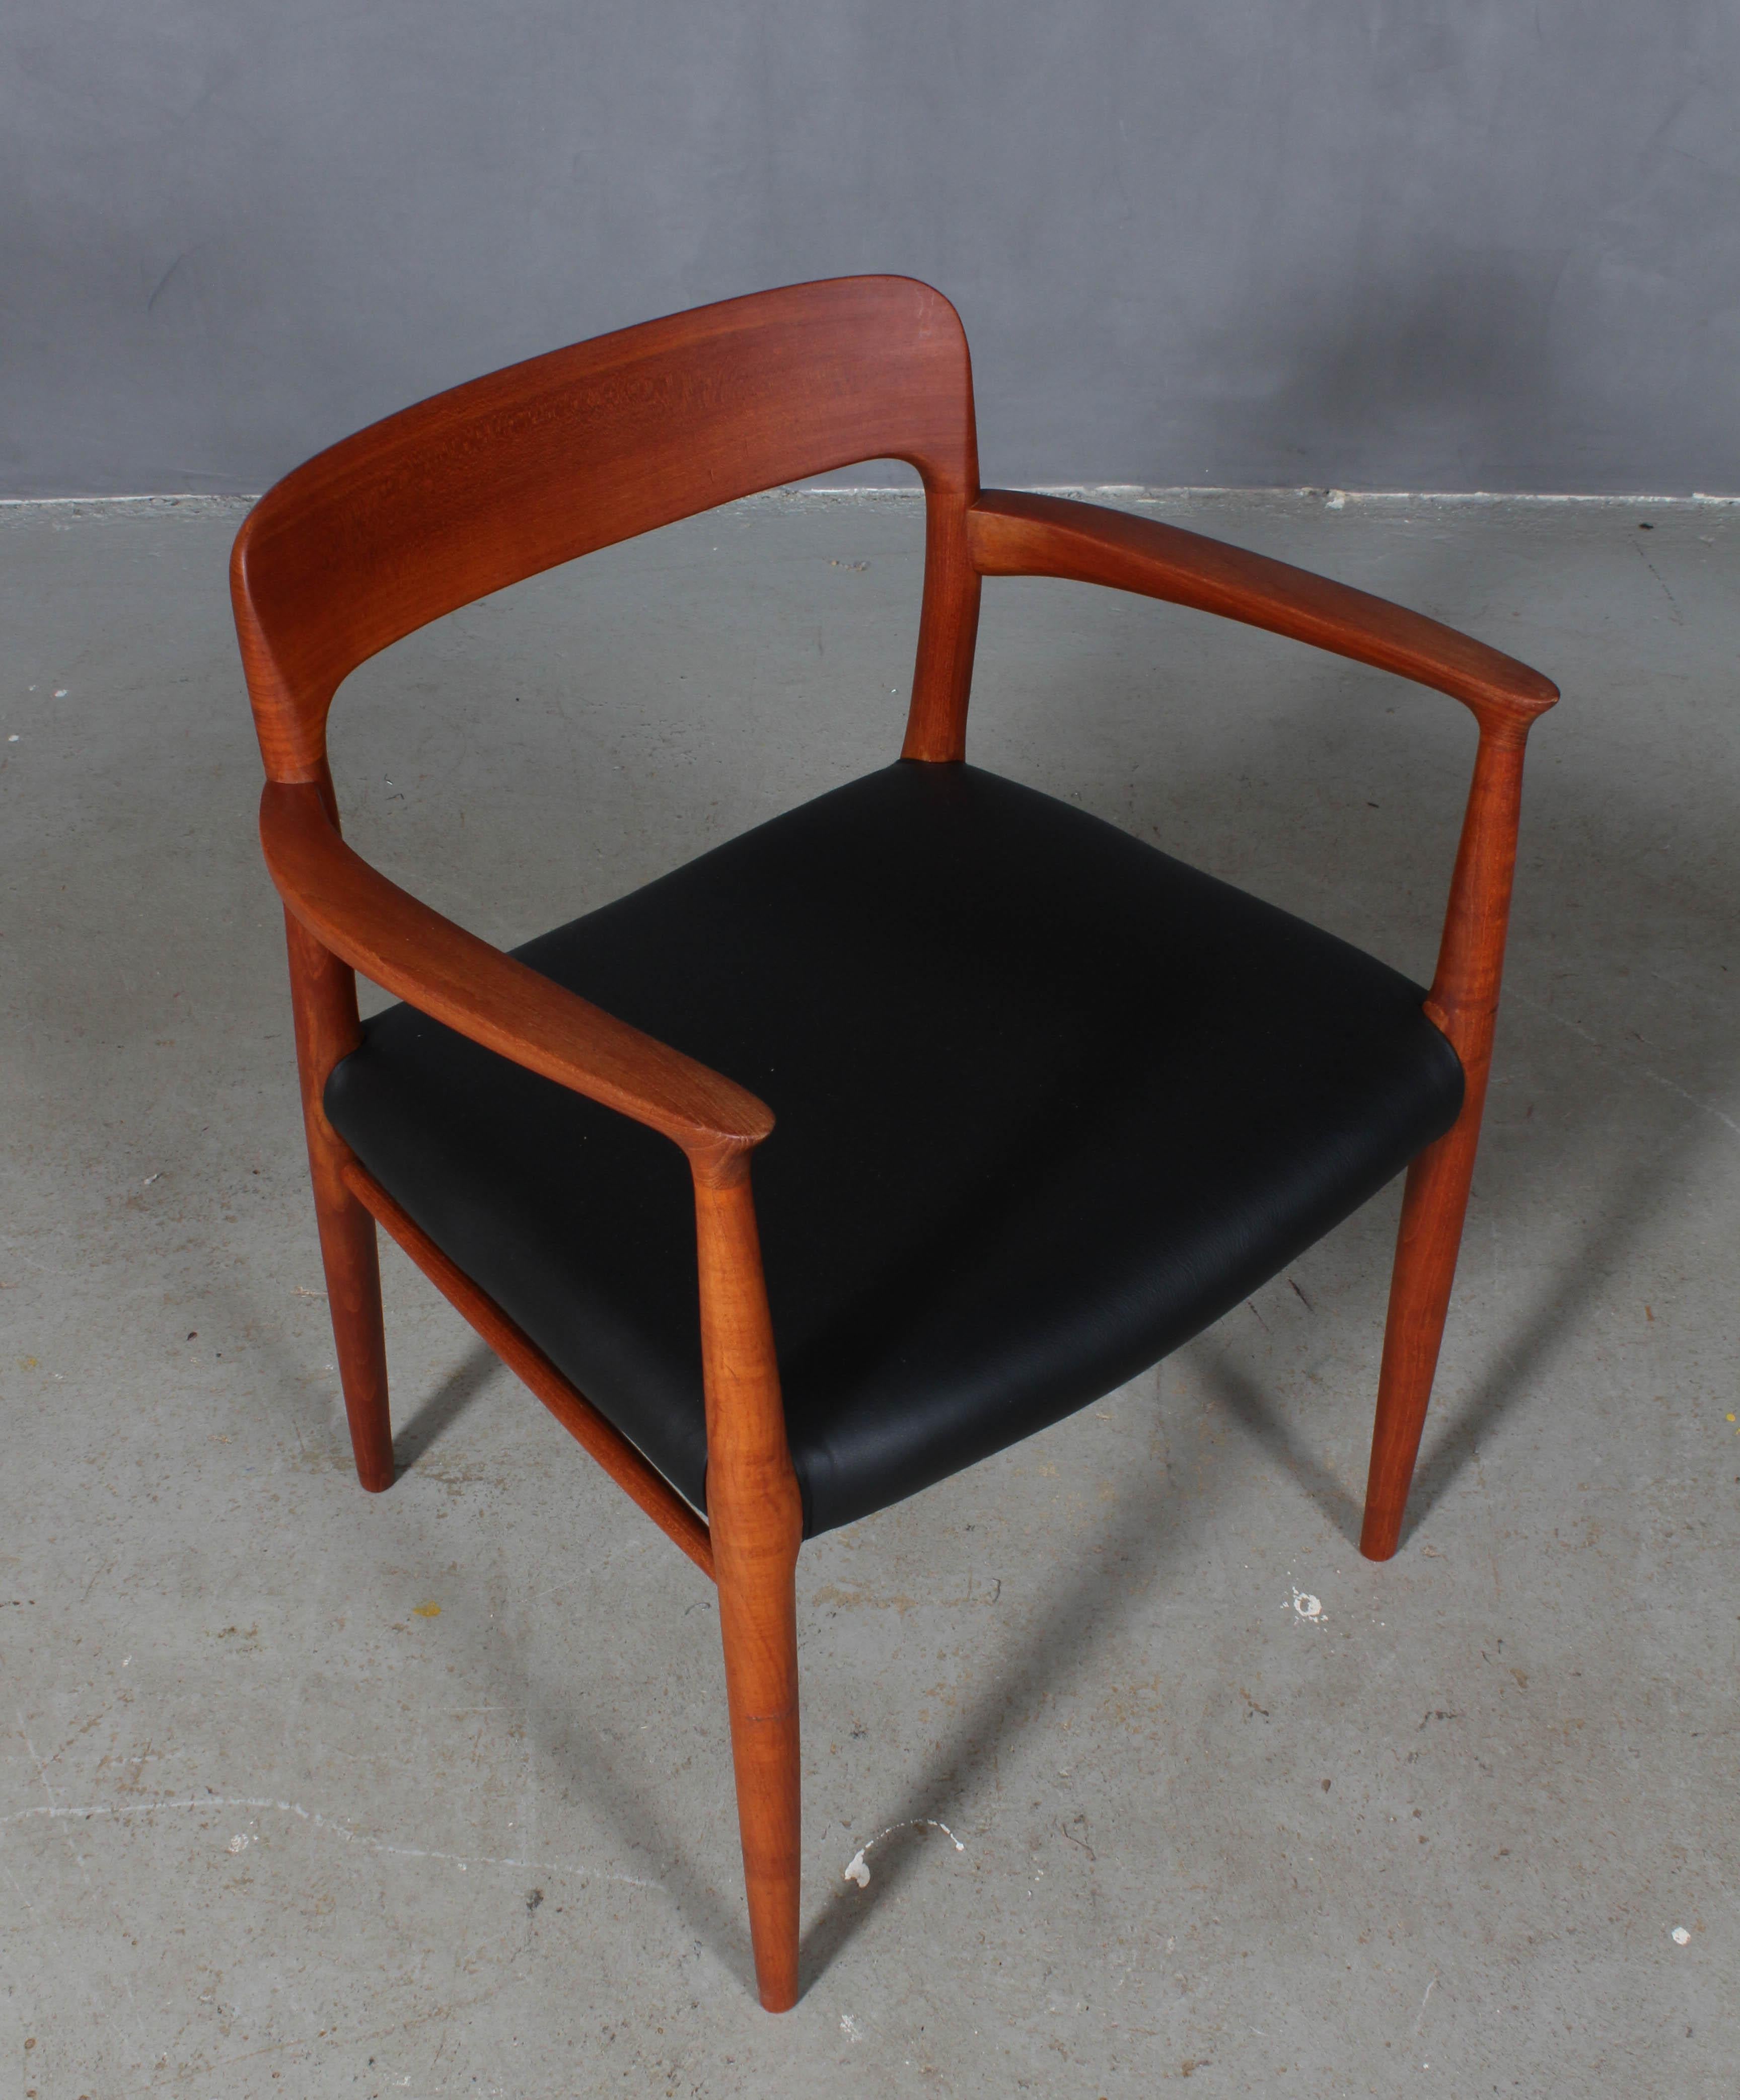 N. O. Møller armchair with frame of solid oiled teak.

Seat new upholstered with black aniline leather.

Model 56, made by J. L. Møller, Denmark, 1960s.